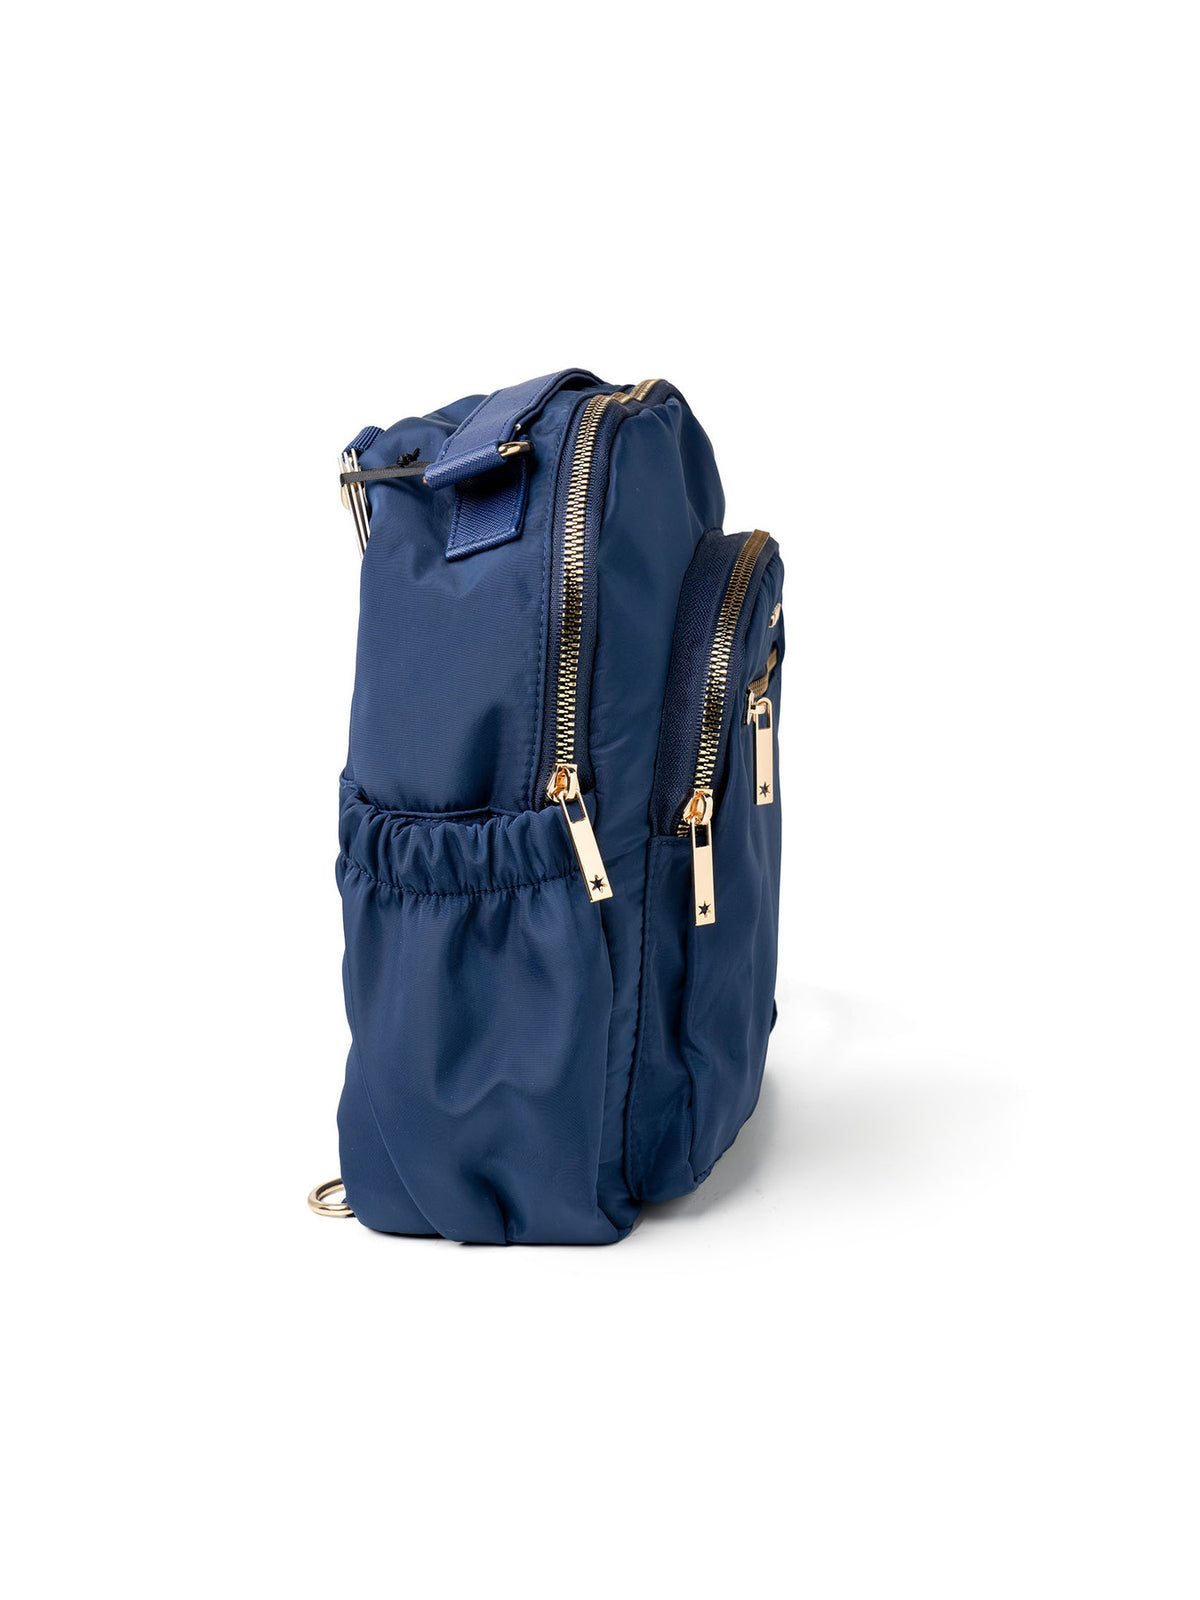 kedzie aire convertible backpack in navy